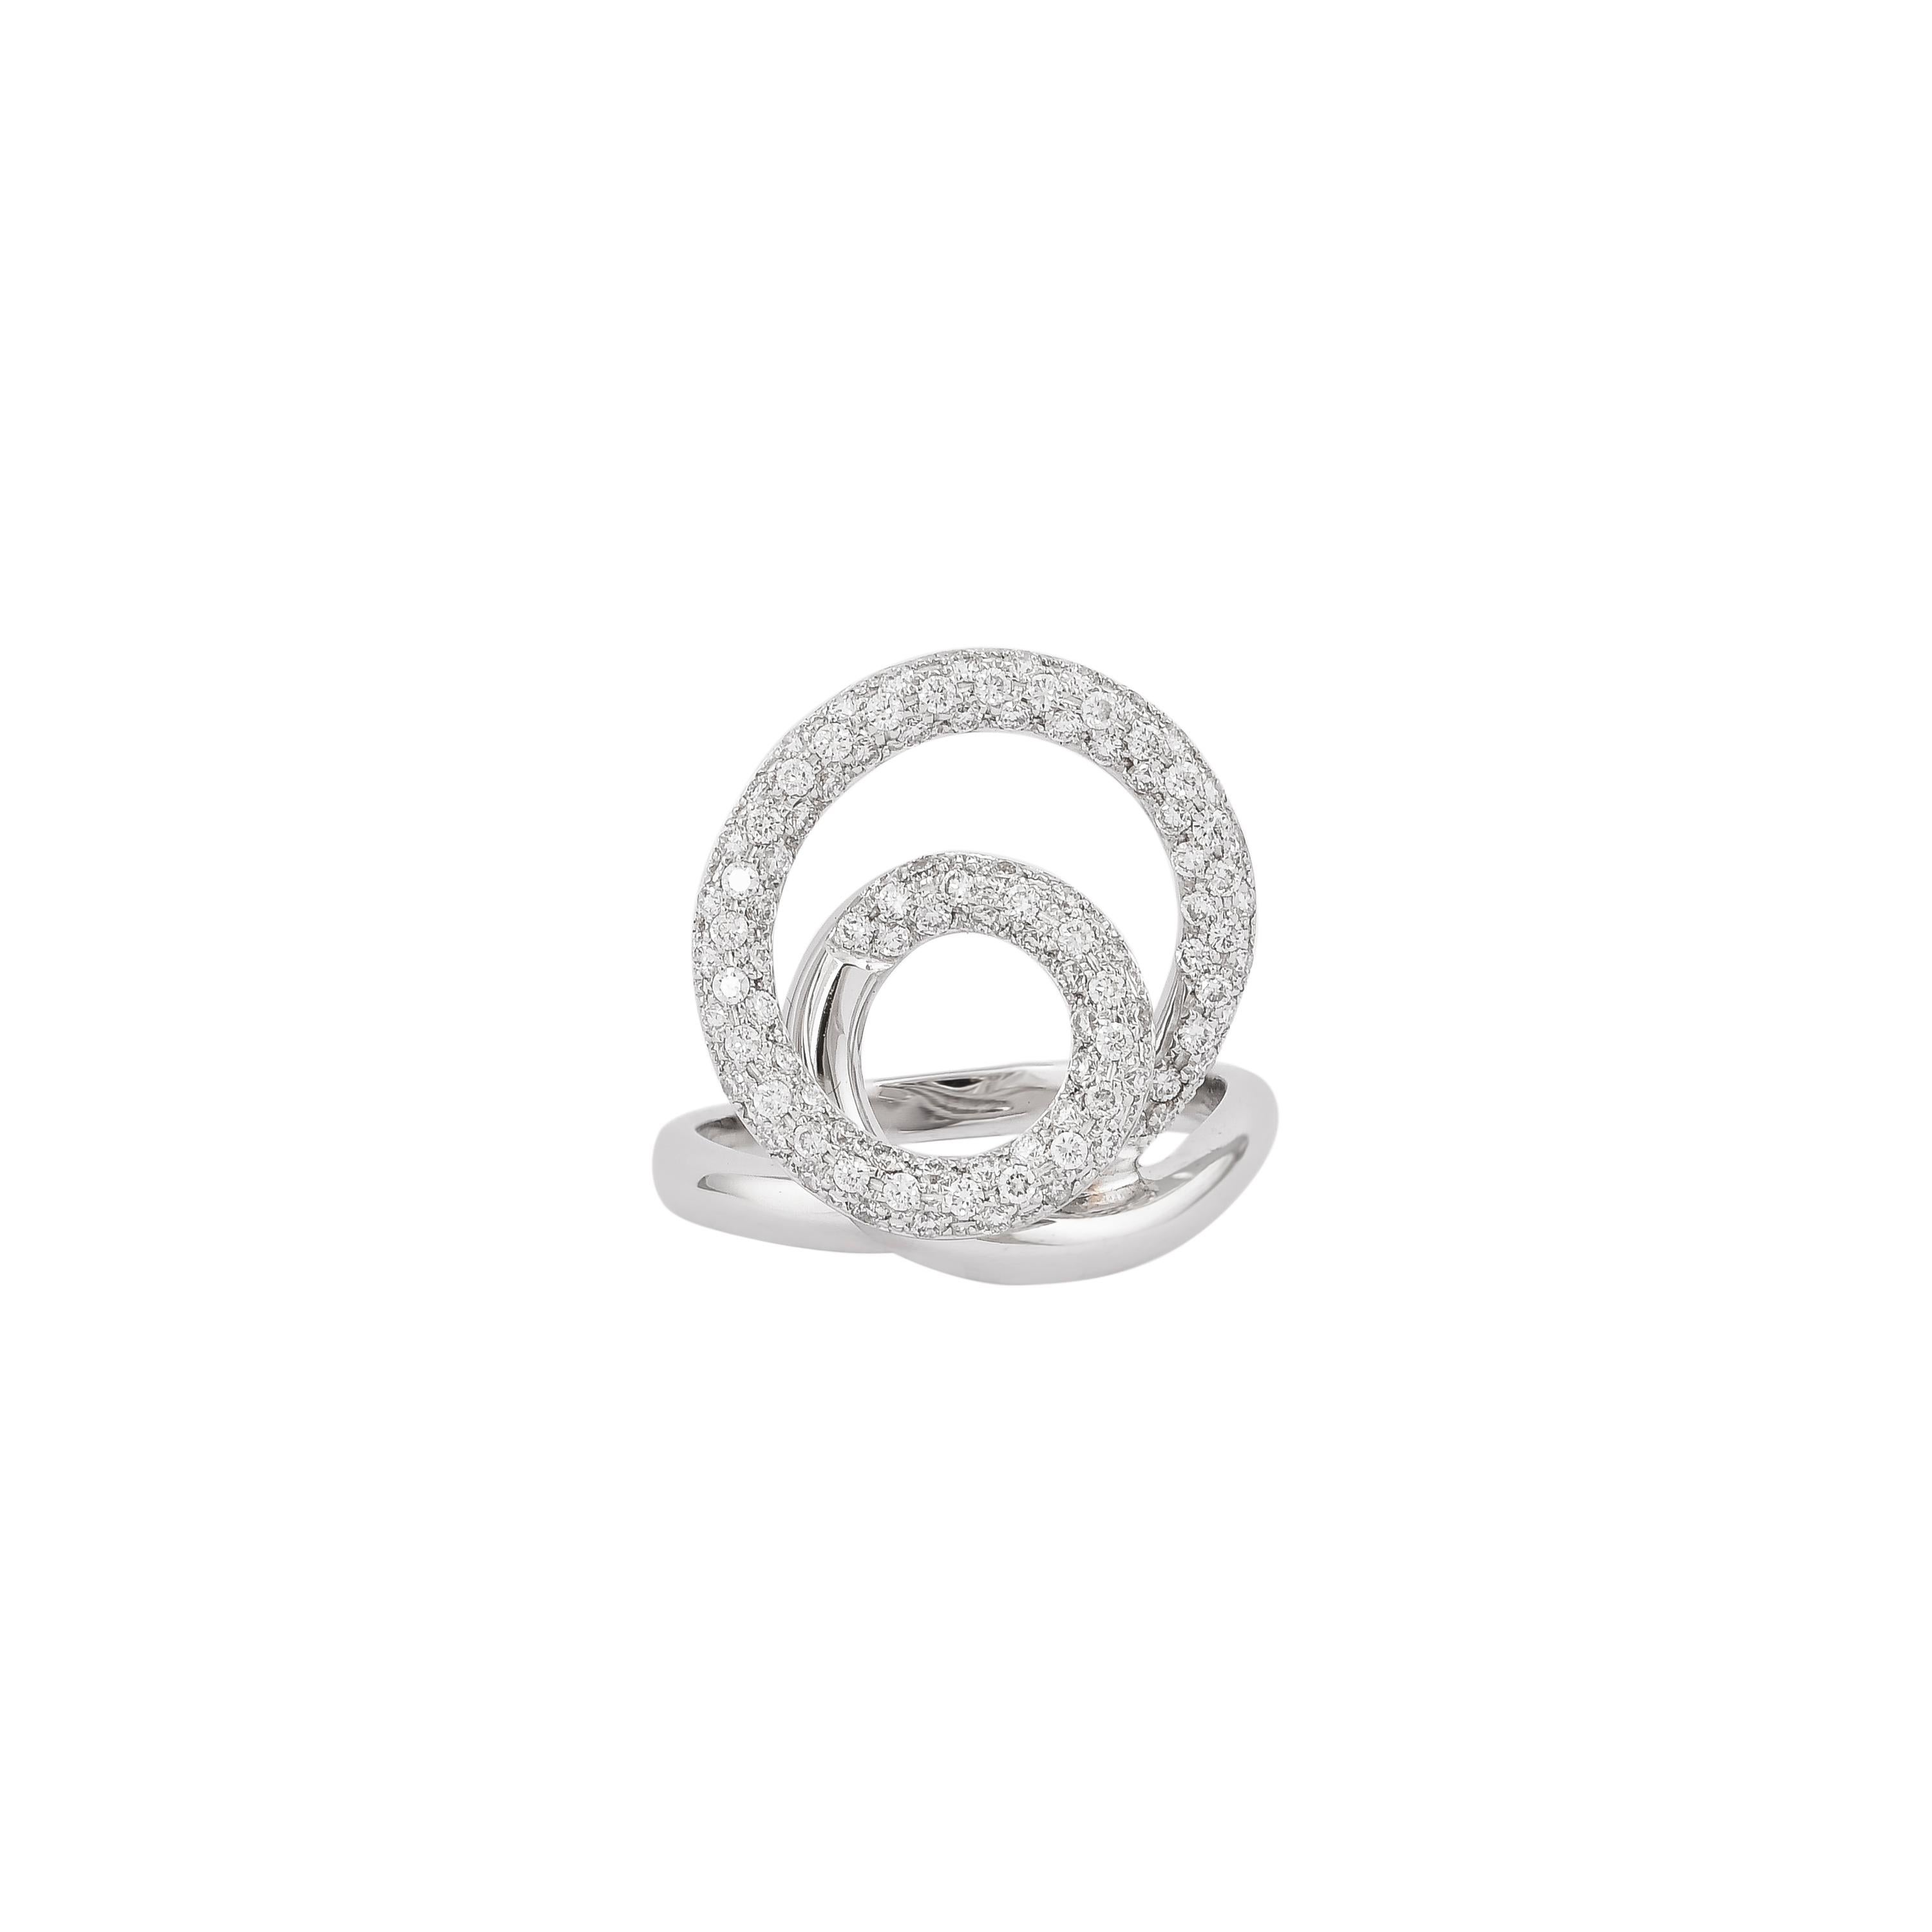 Contemporary 0.82 Carat Diamond Ring in 18 Karat White Gold For Sale